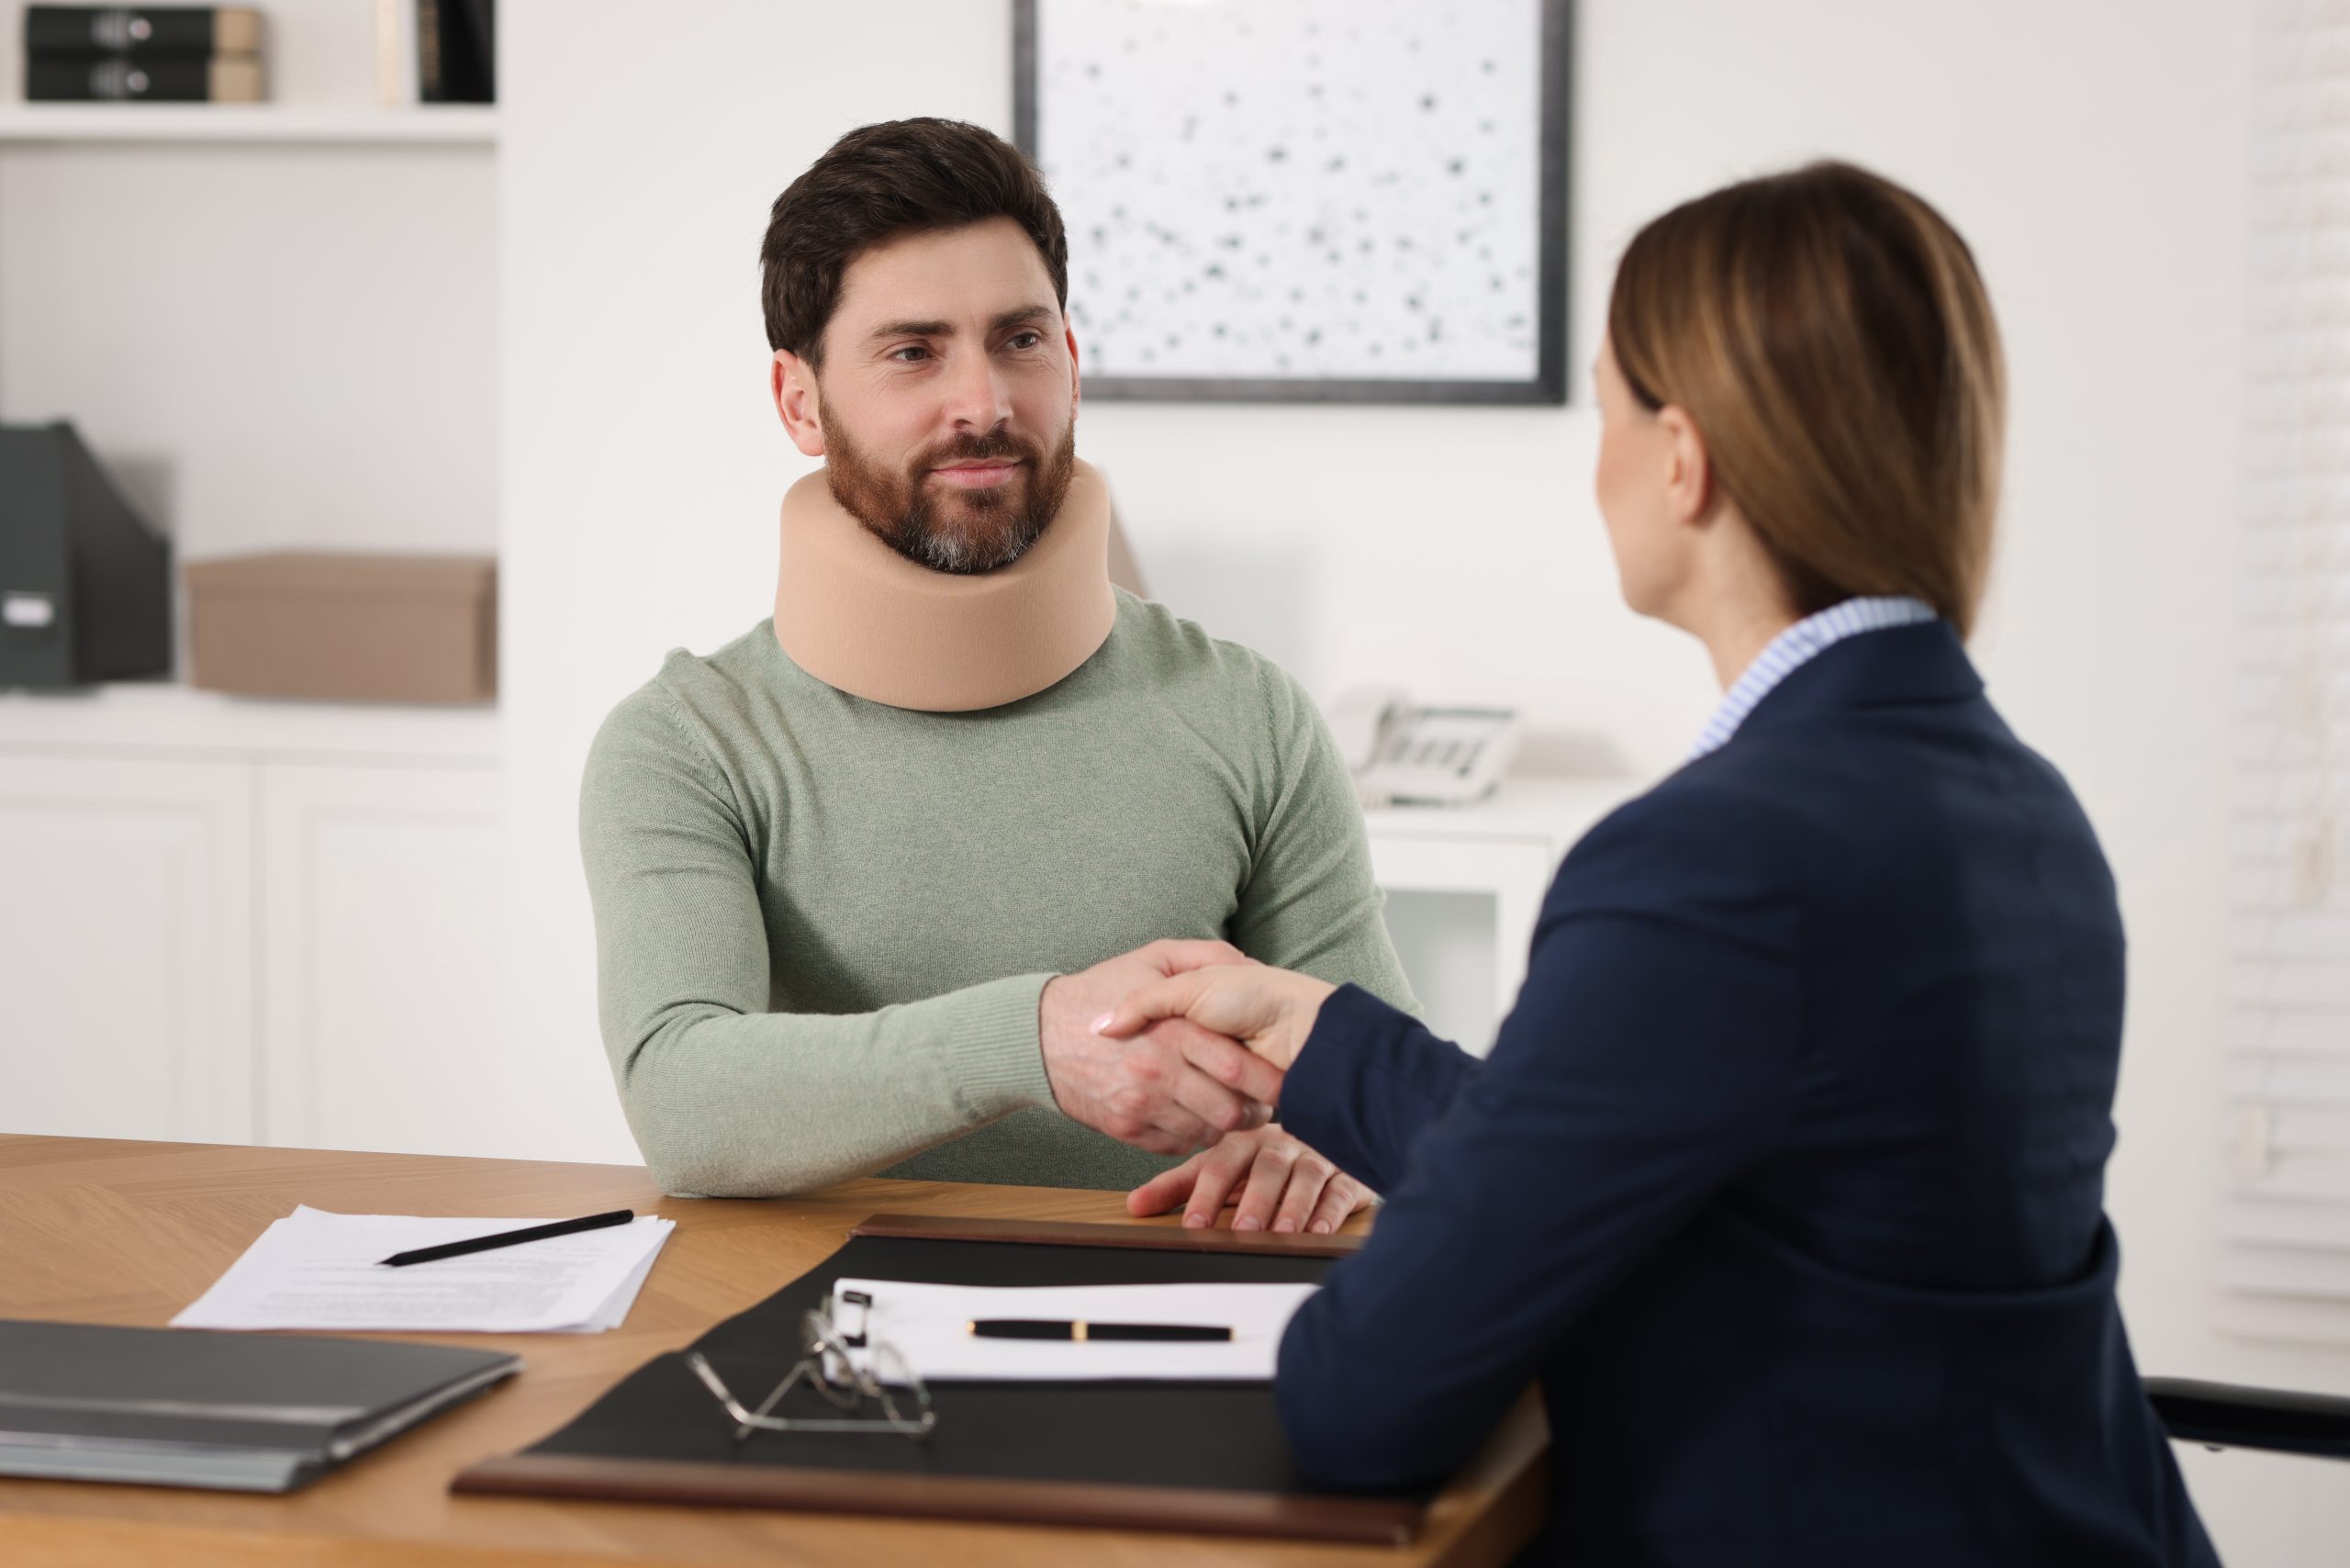 A man wearing a neck brace is sitting at a desk, shaking hands with a woman in a blue jacket. Papers and a clipboard are on the desk in front of them, suggesting a consultation for legal advice regarding his traumatic injuries. They are in a bright office setting.